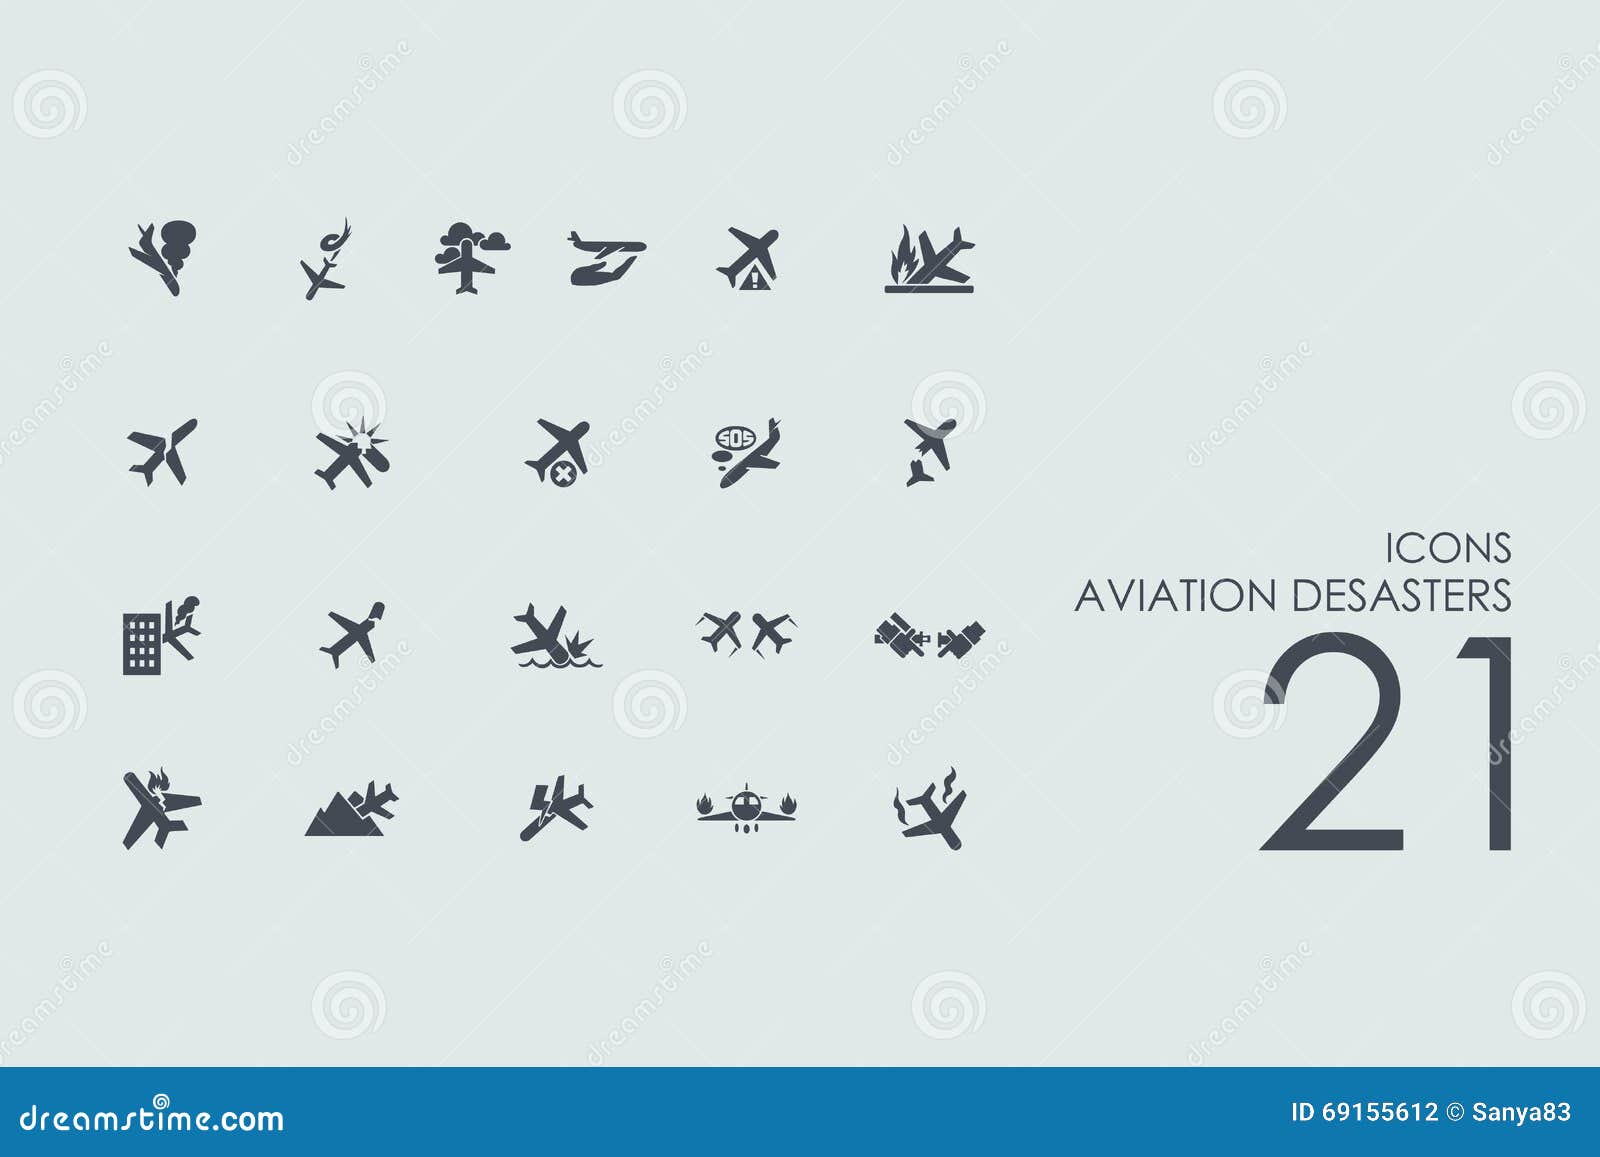 set of aviation desasters icons